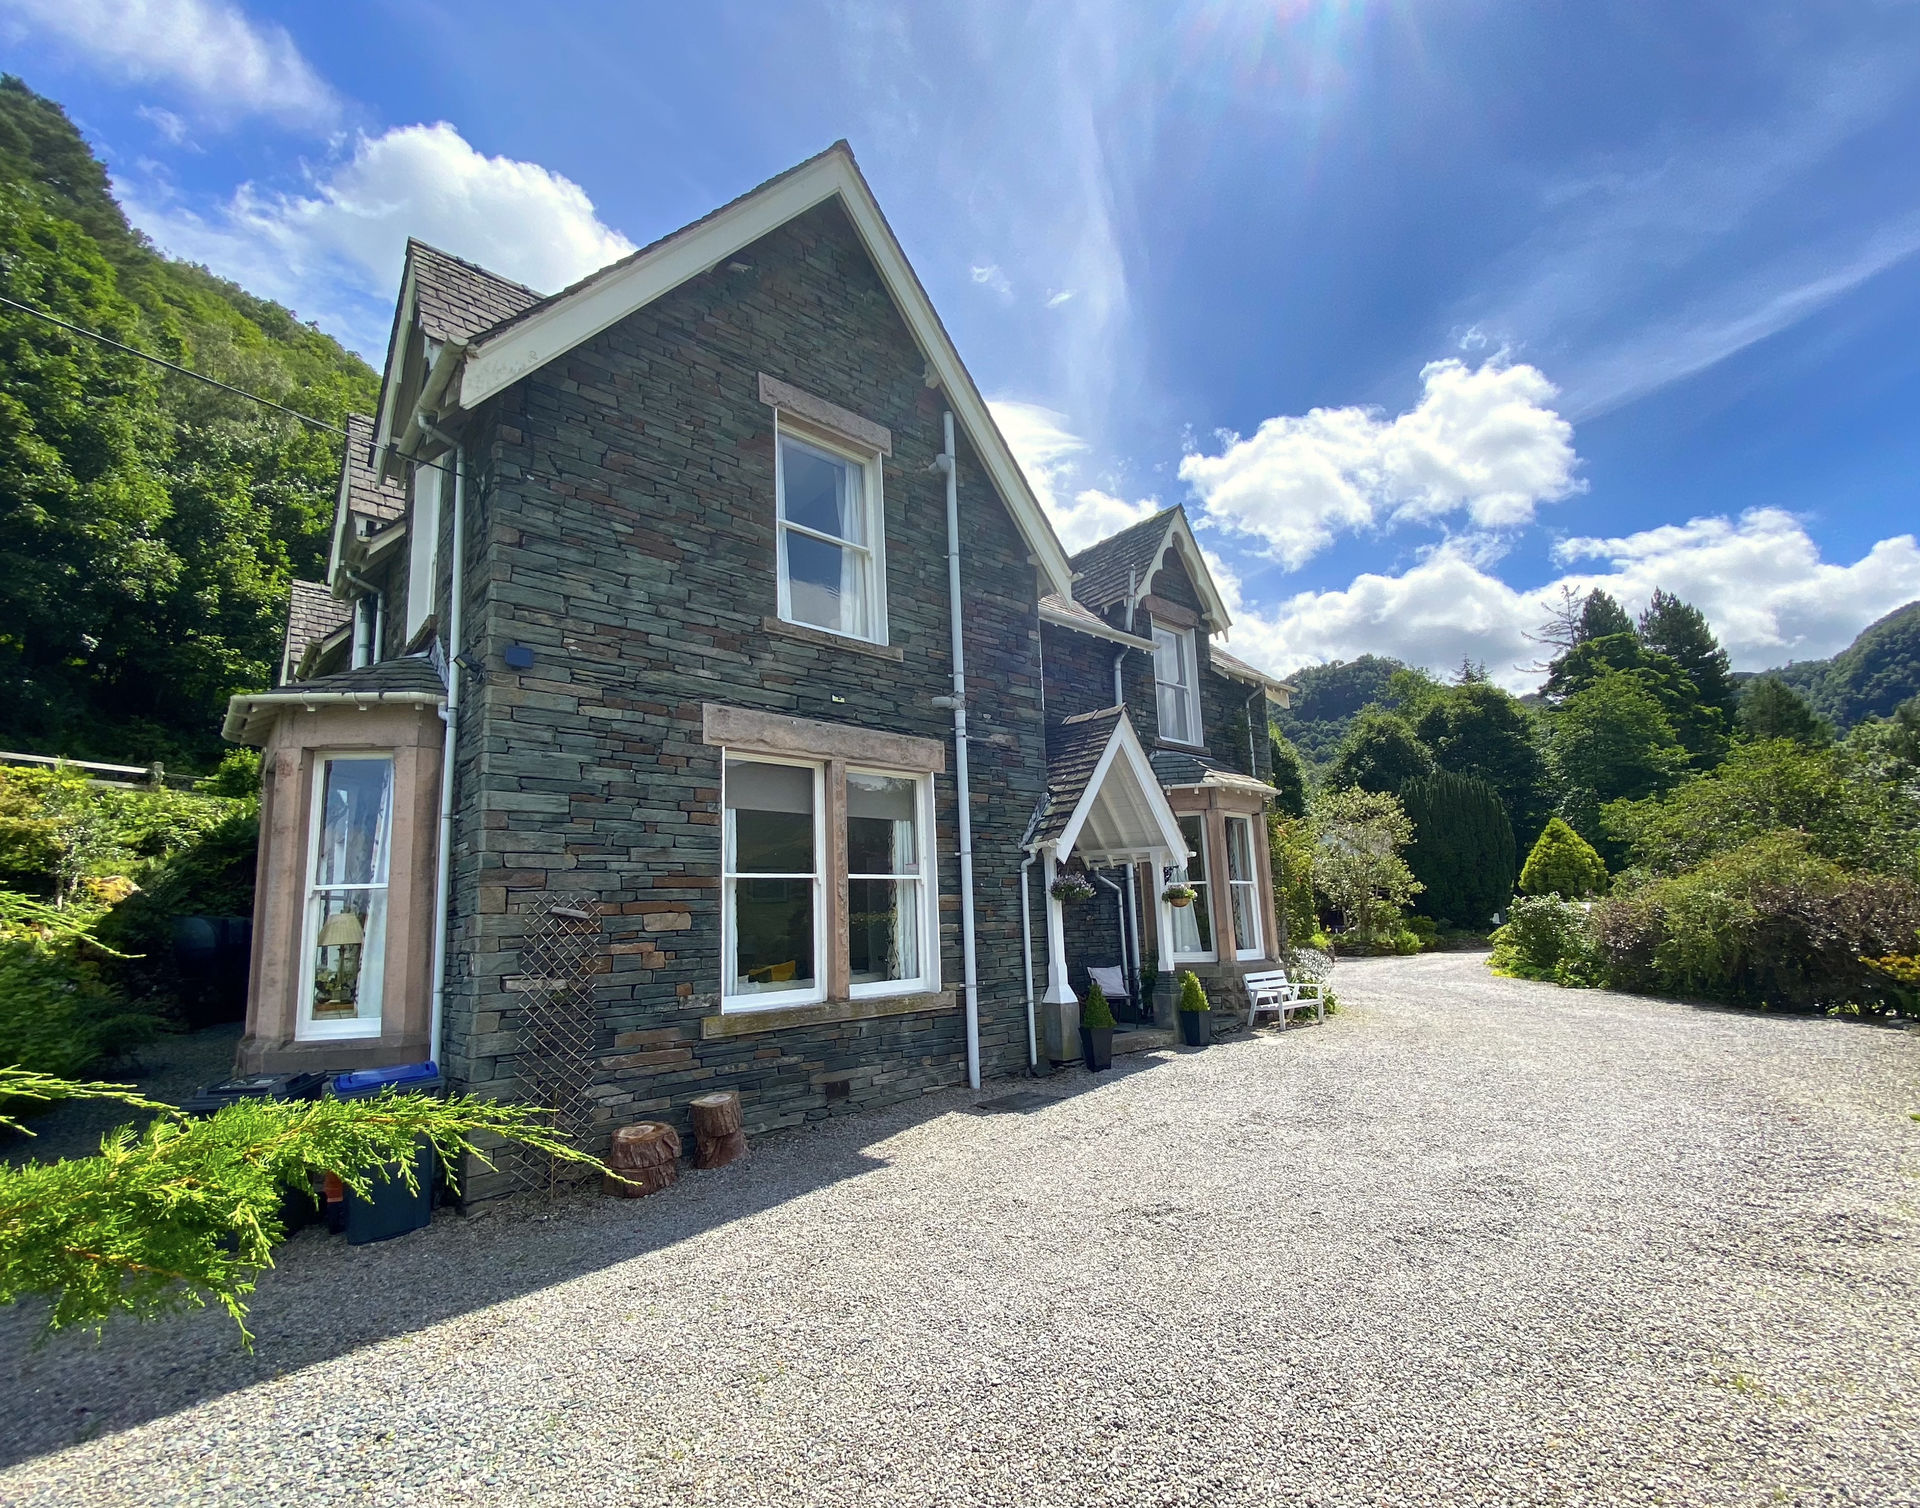 Self-Catering Lake District Holiday House